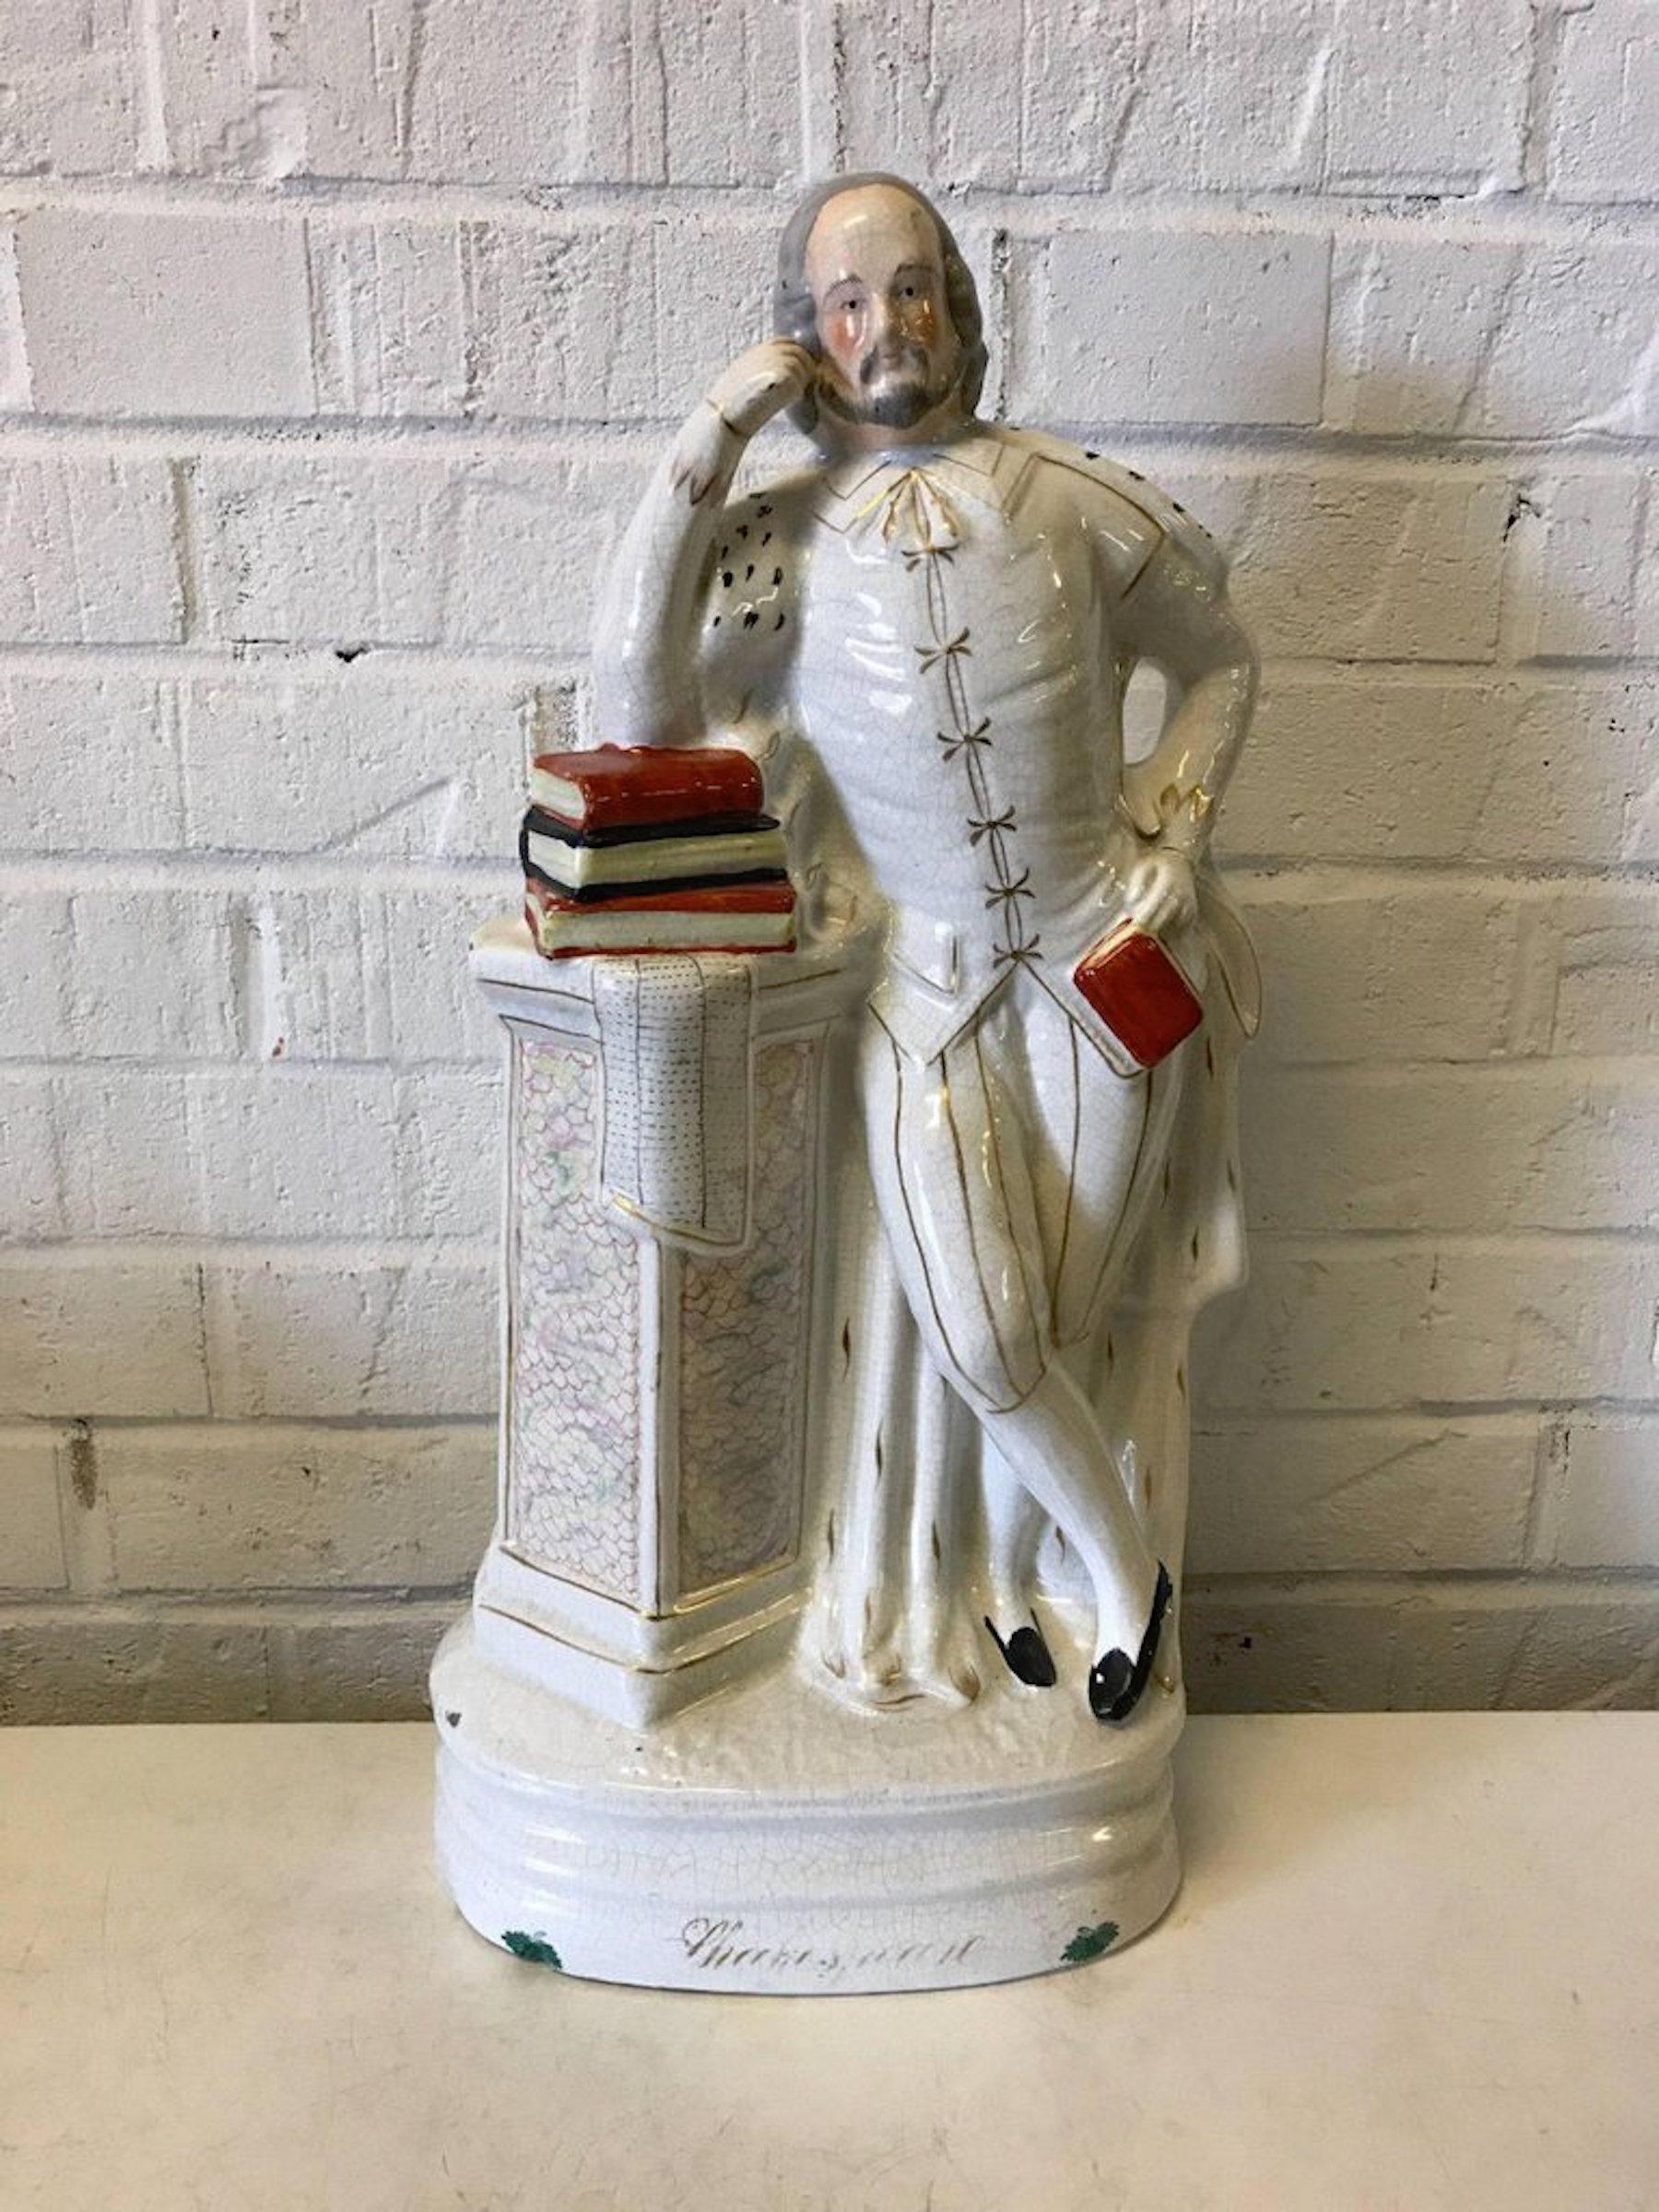 19th century Staffordshire portrait figure of Shakespeare
A similar statue was recently sold at the Sotheby's auction (9/26/17) collection of Vivien Leigh (item #79), photographed in situ at Notley Abbey in the drawing room, circa 1959 and